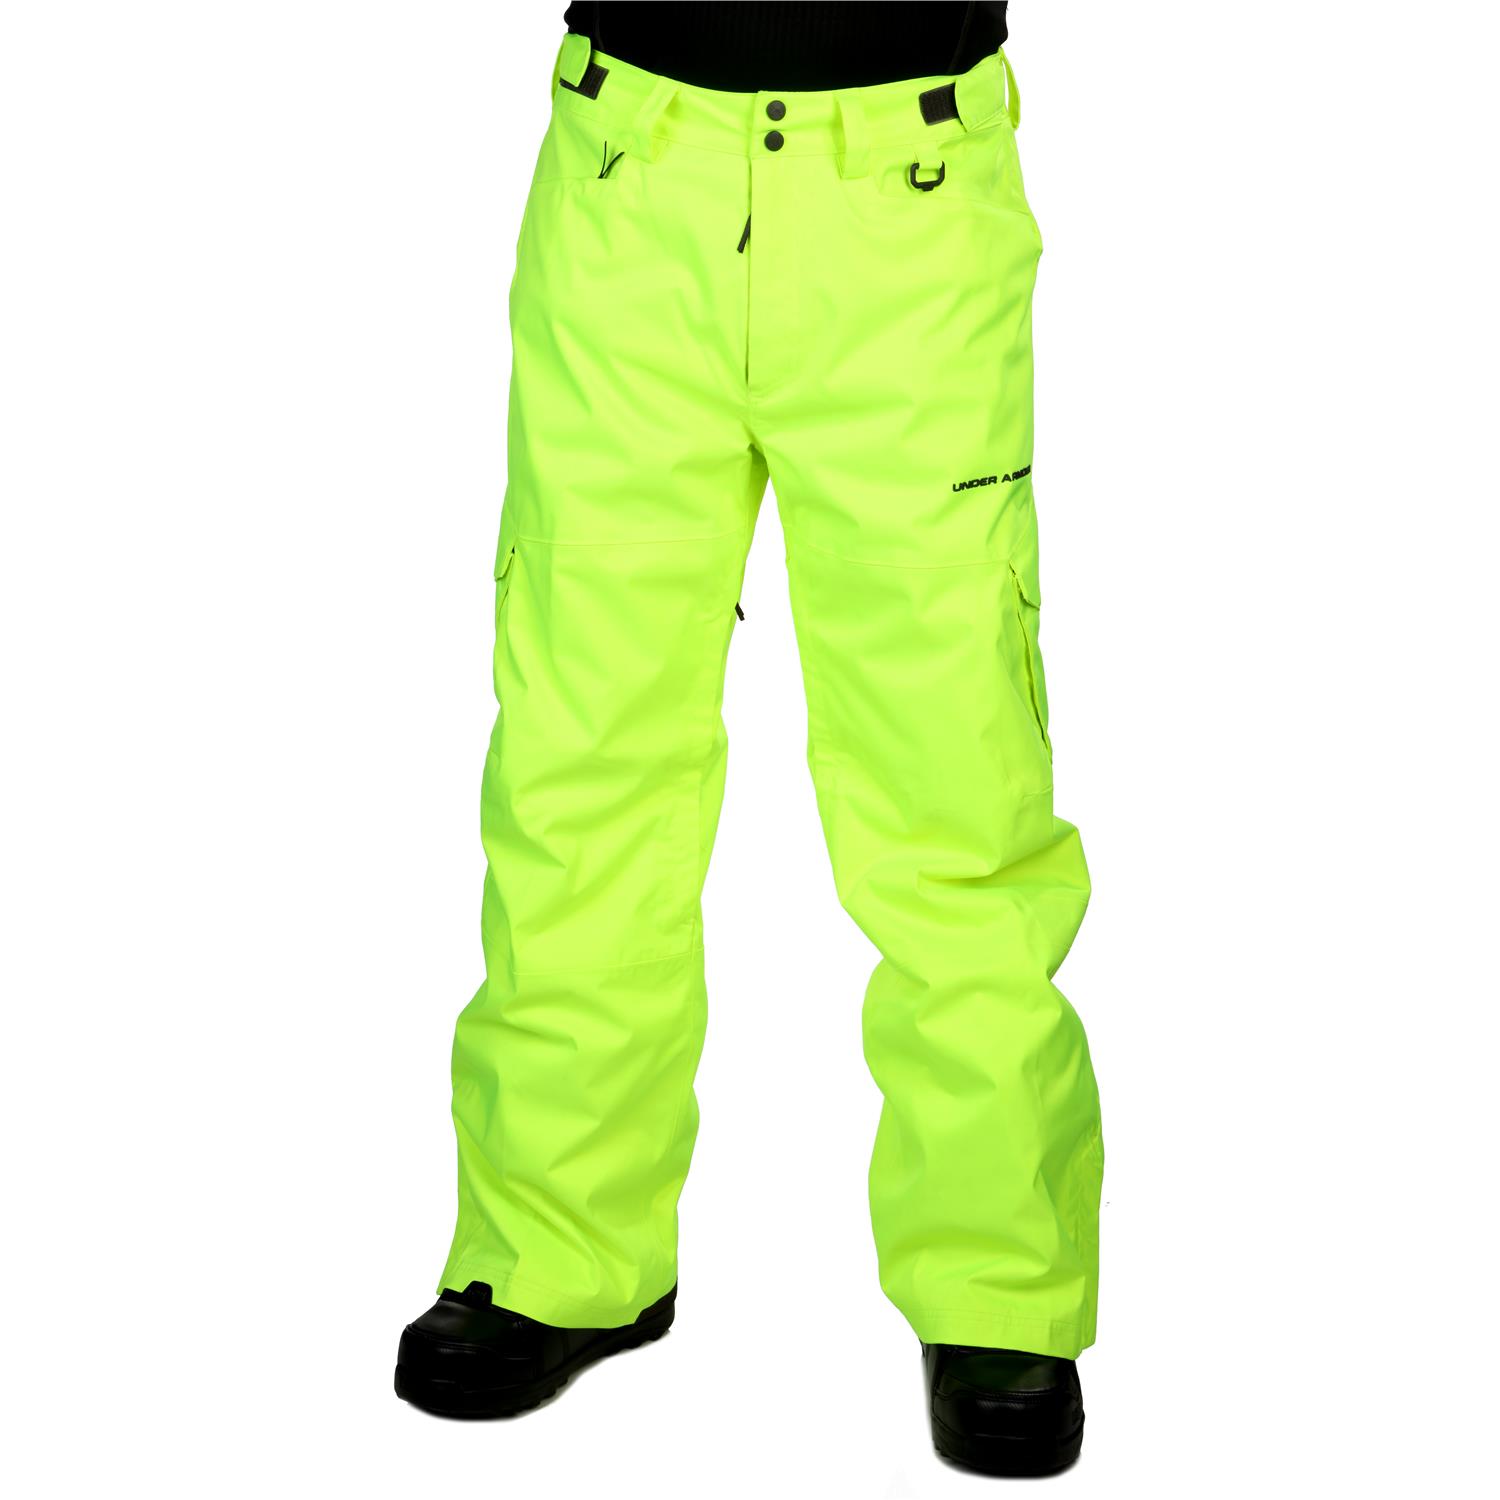 Under Armour Coldgear Infrared Snocone Pants | evo outlet